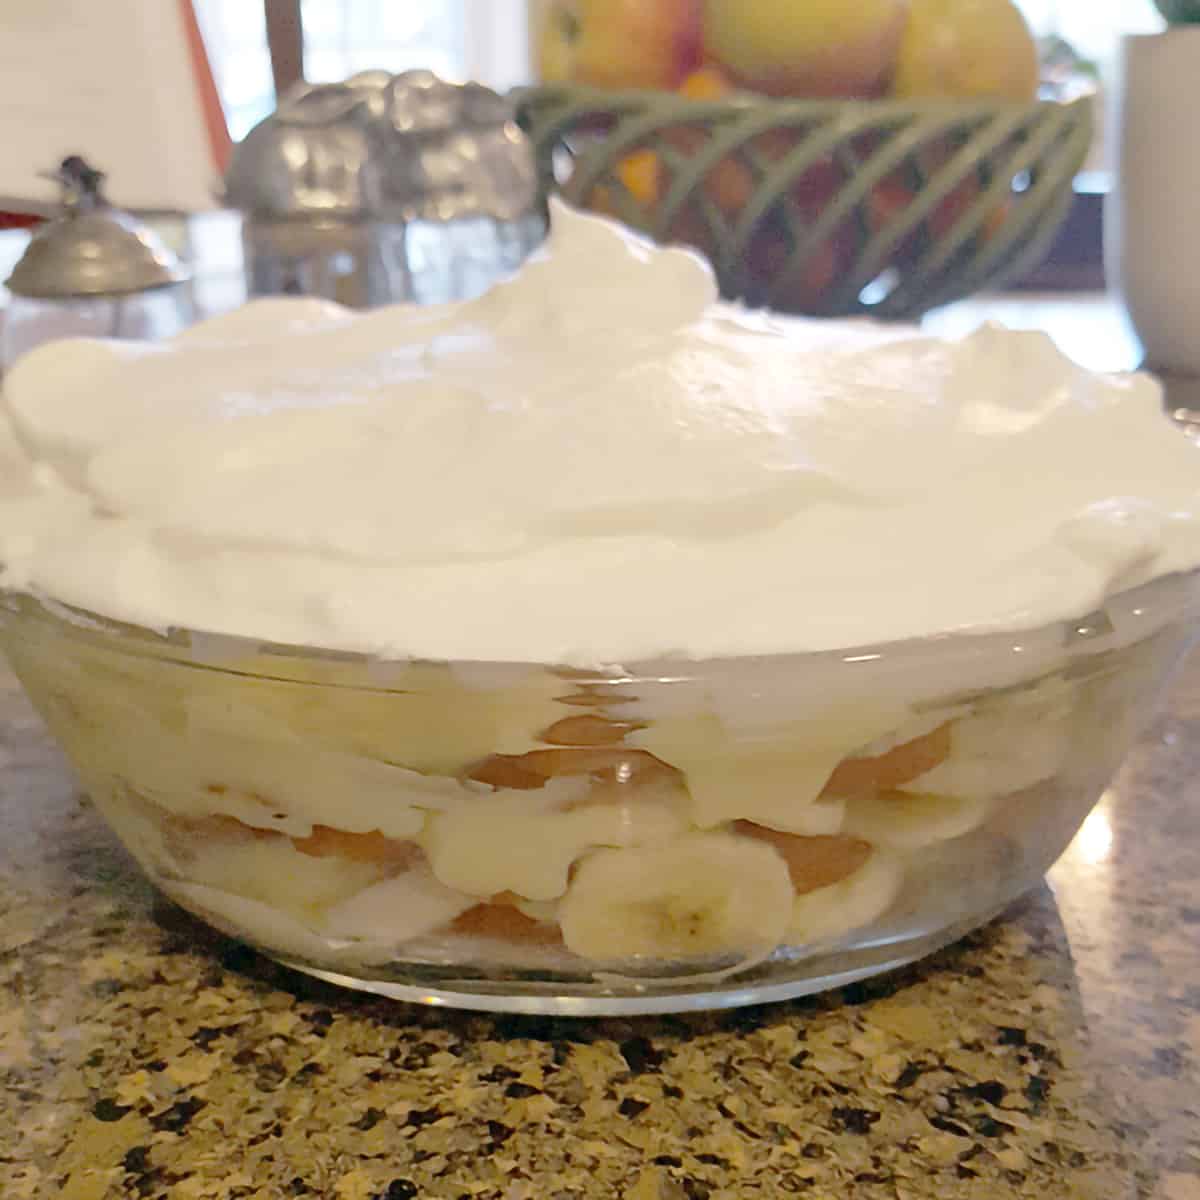 Finished banana pudding with meringue on top.